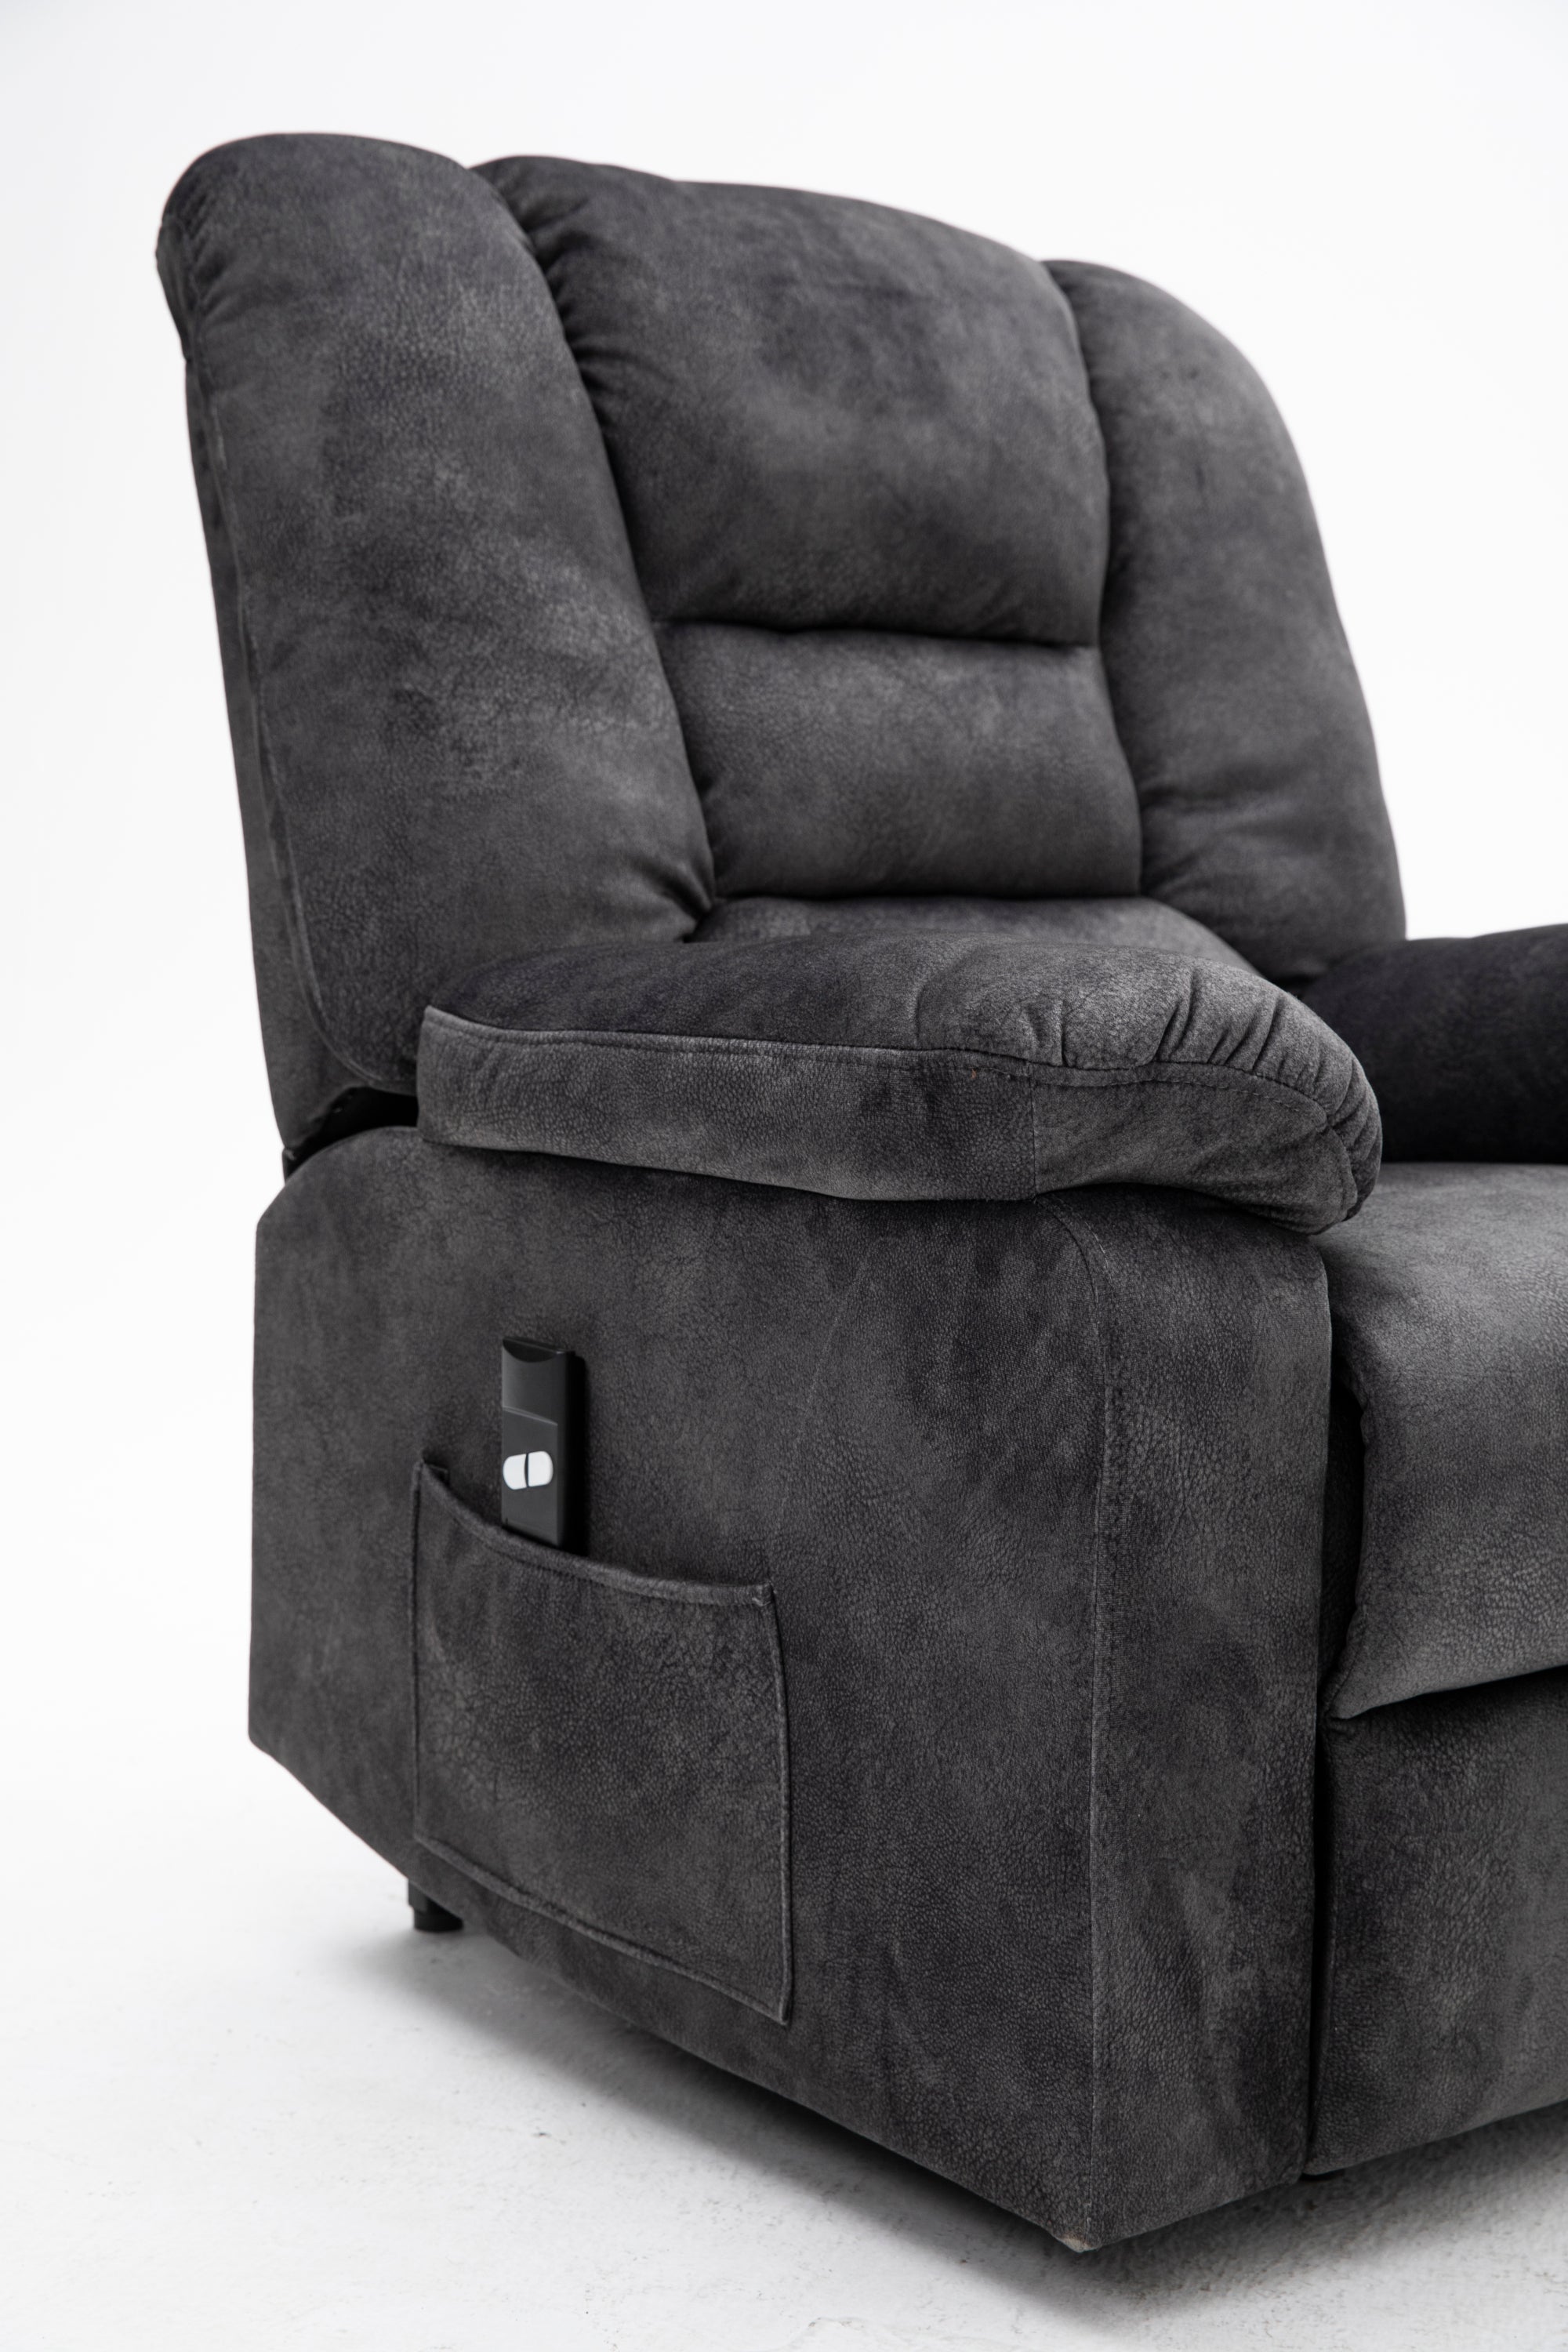 Remote Control Recliner Sofa Chair for Elderly By: Alabama Beds